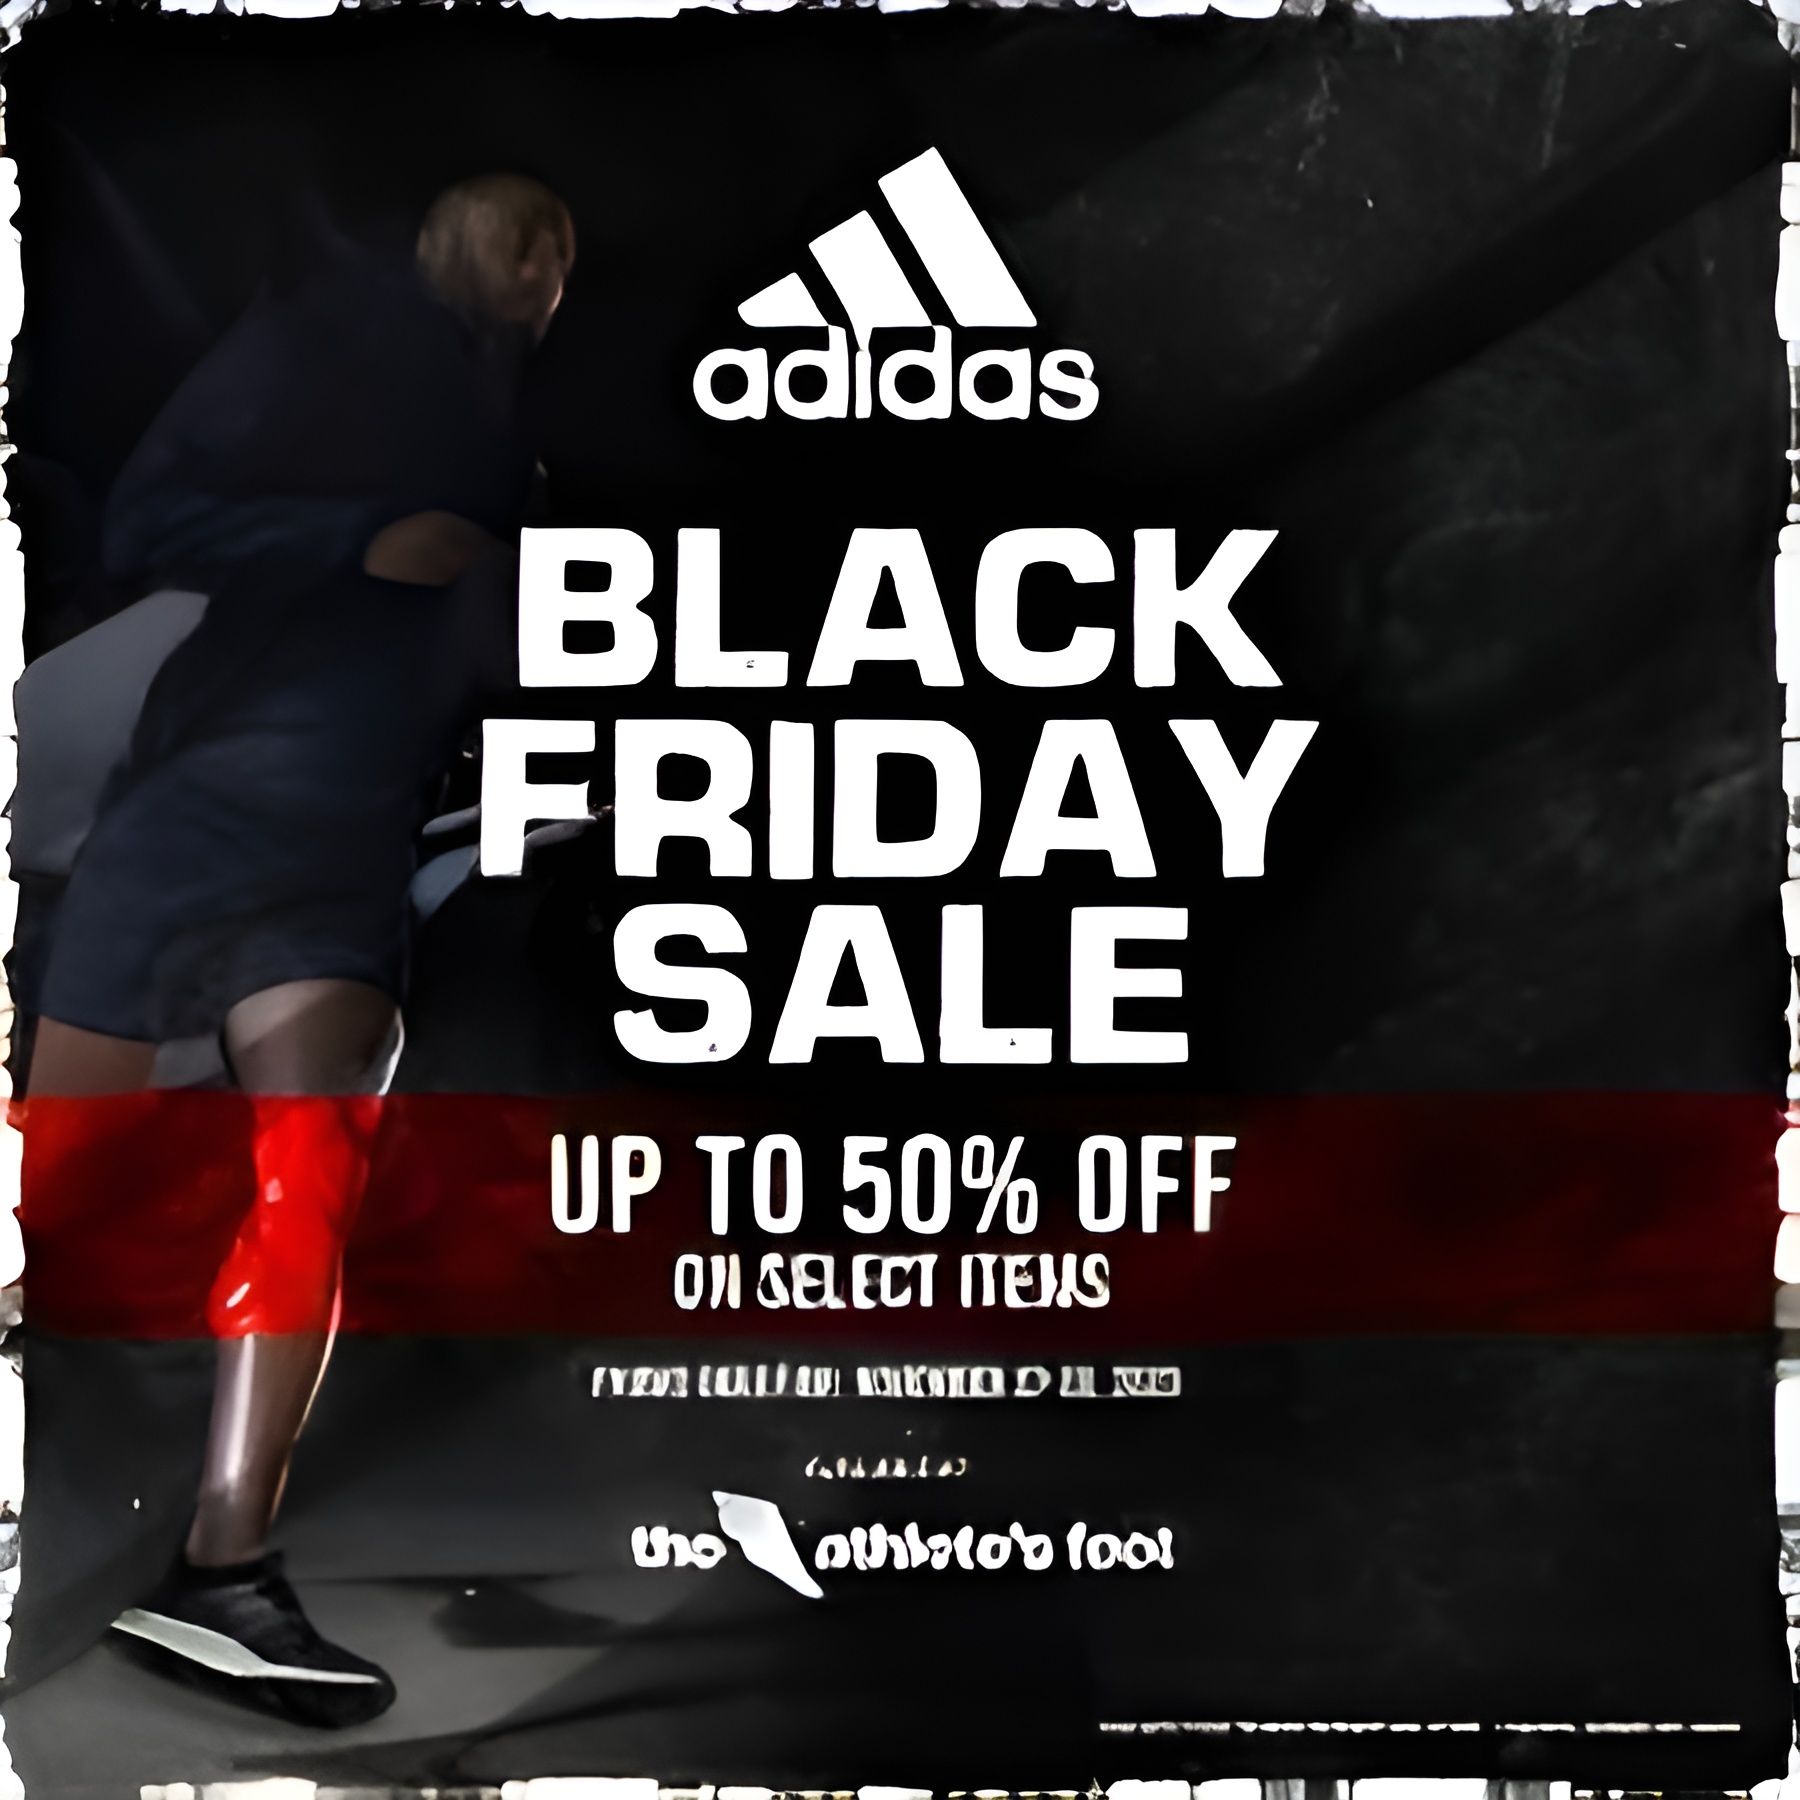 Adidas Black Friday 2023: How to Save Big on Adidas Shoes, Apparel, and Gear This Year